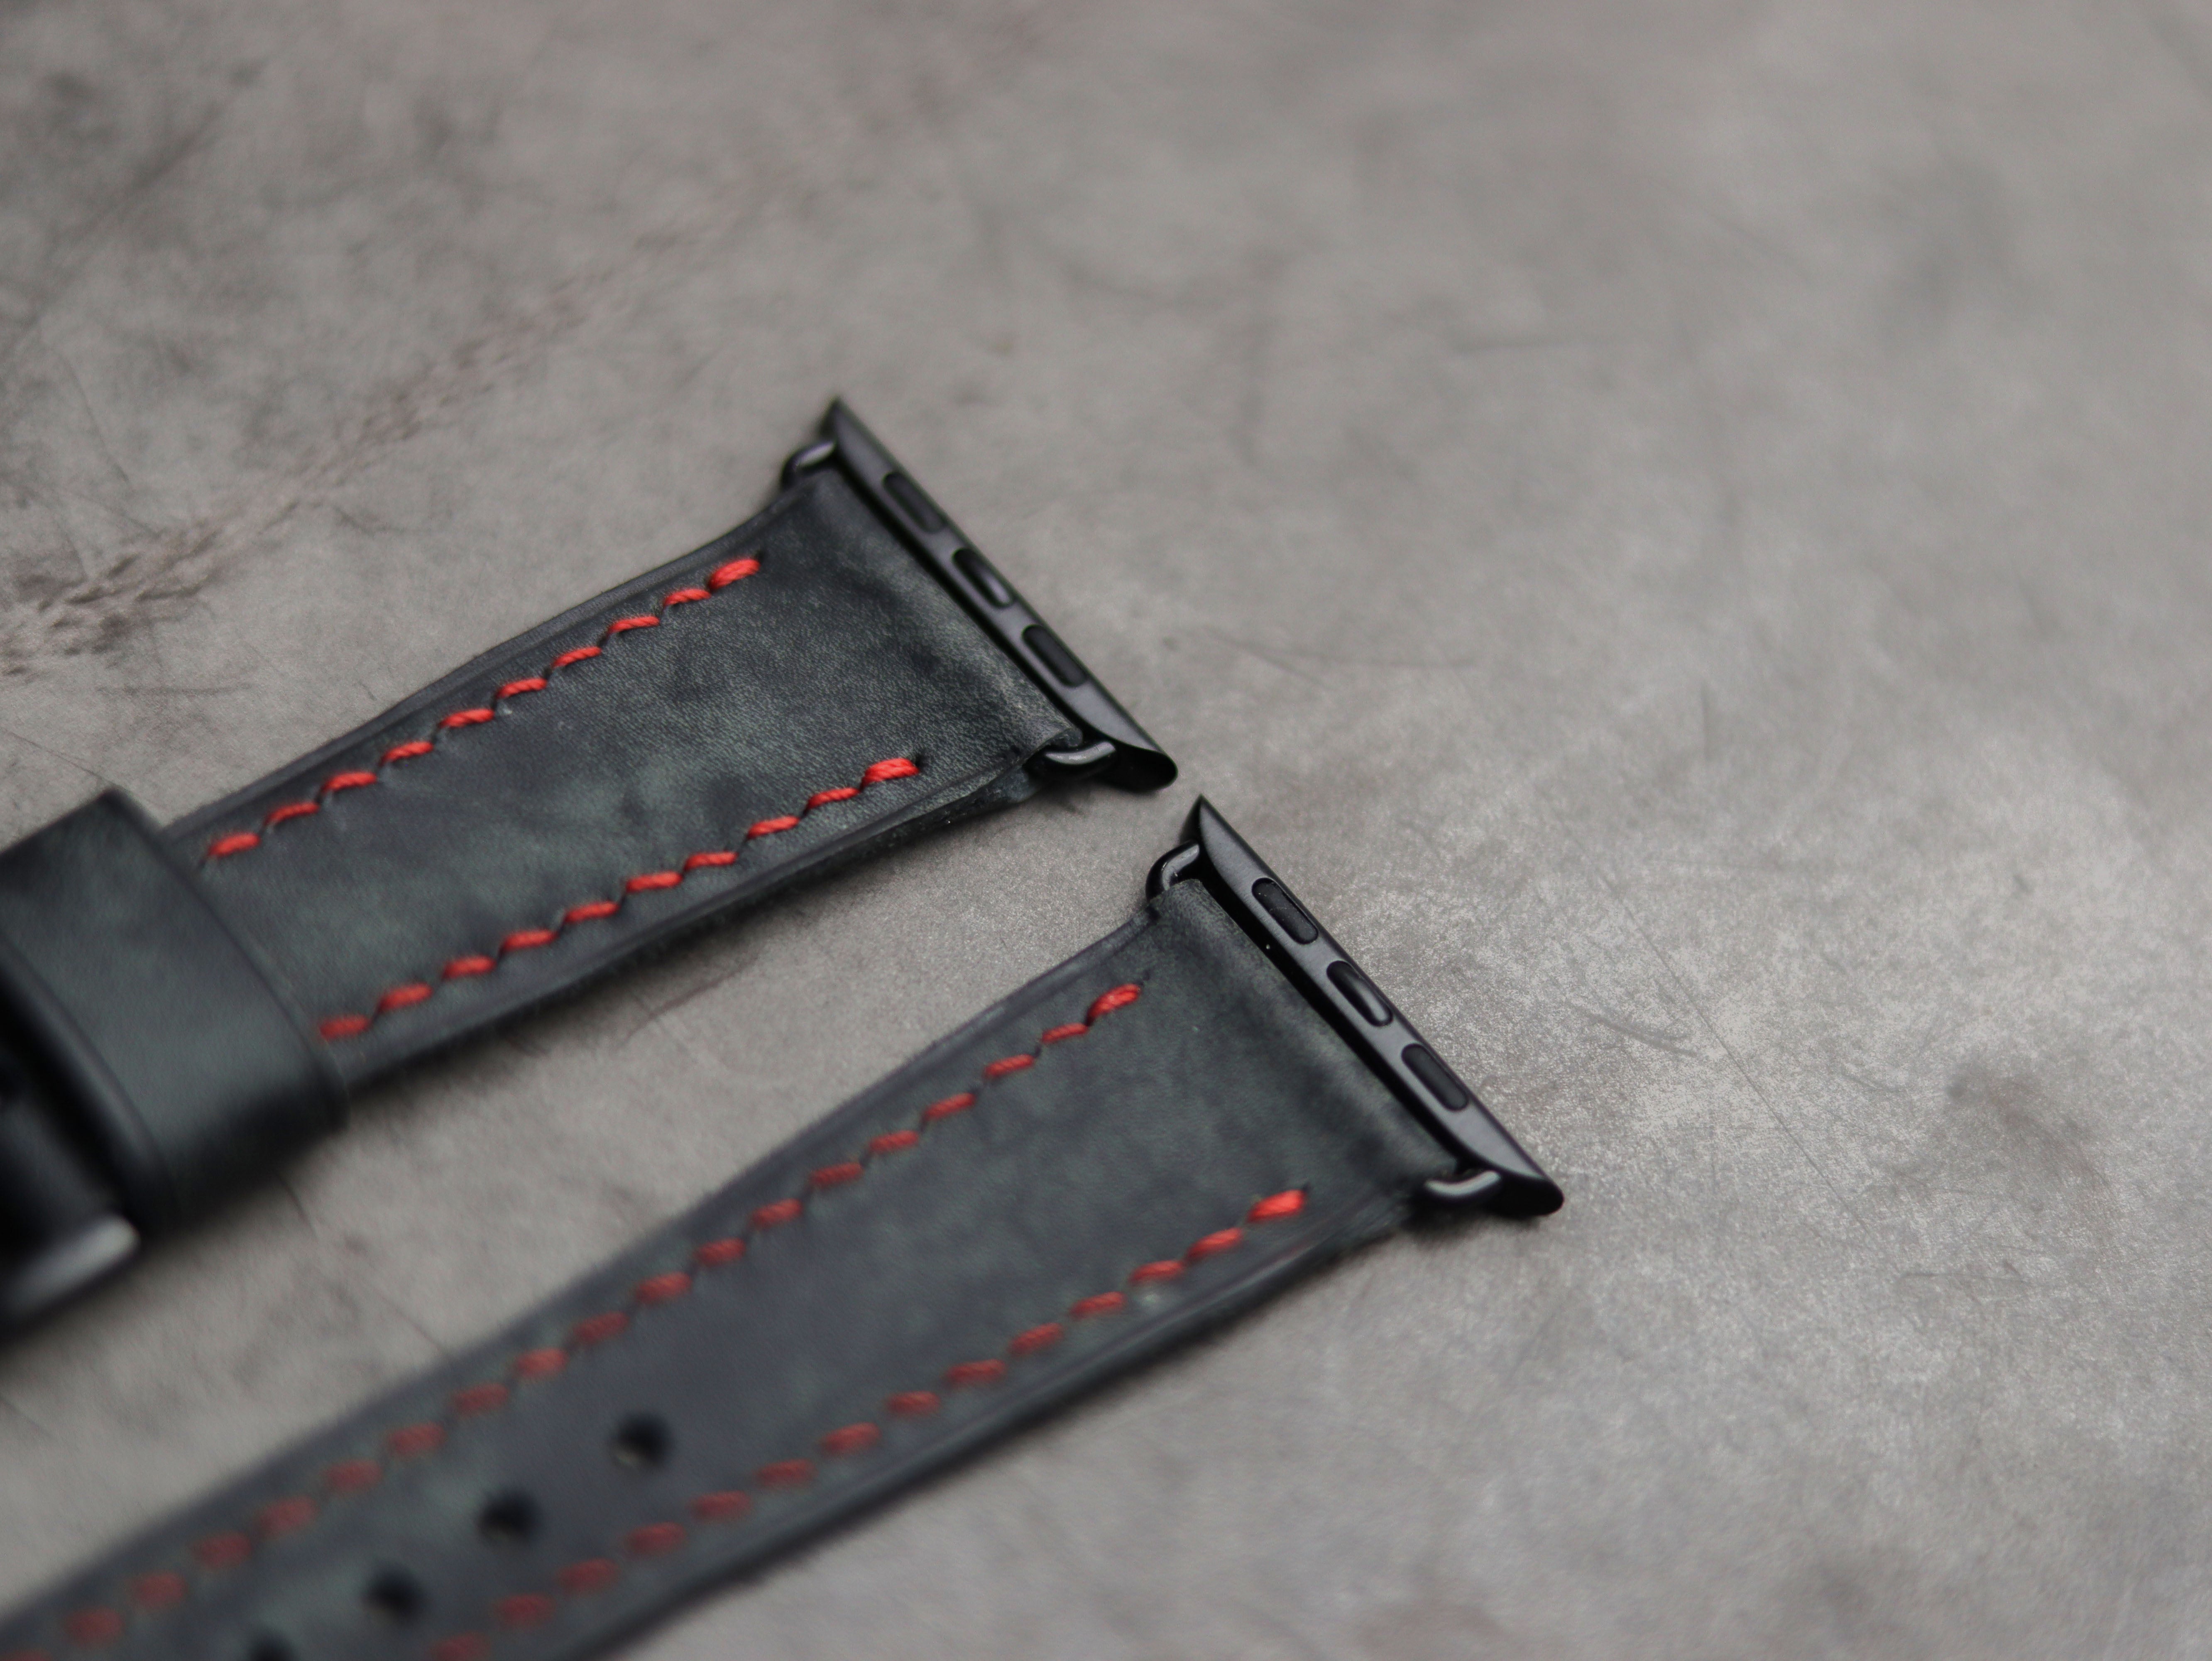 ONYX GREY LEATHER - APPLE WATCH STRAPS HAND-CRAFTED